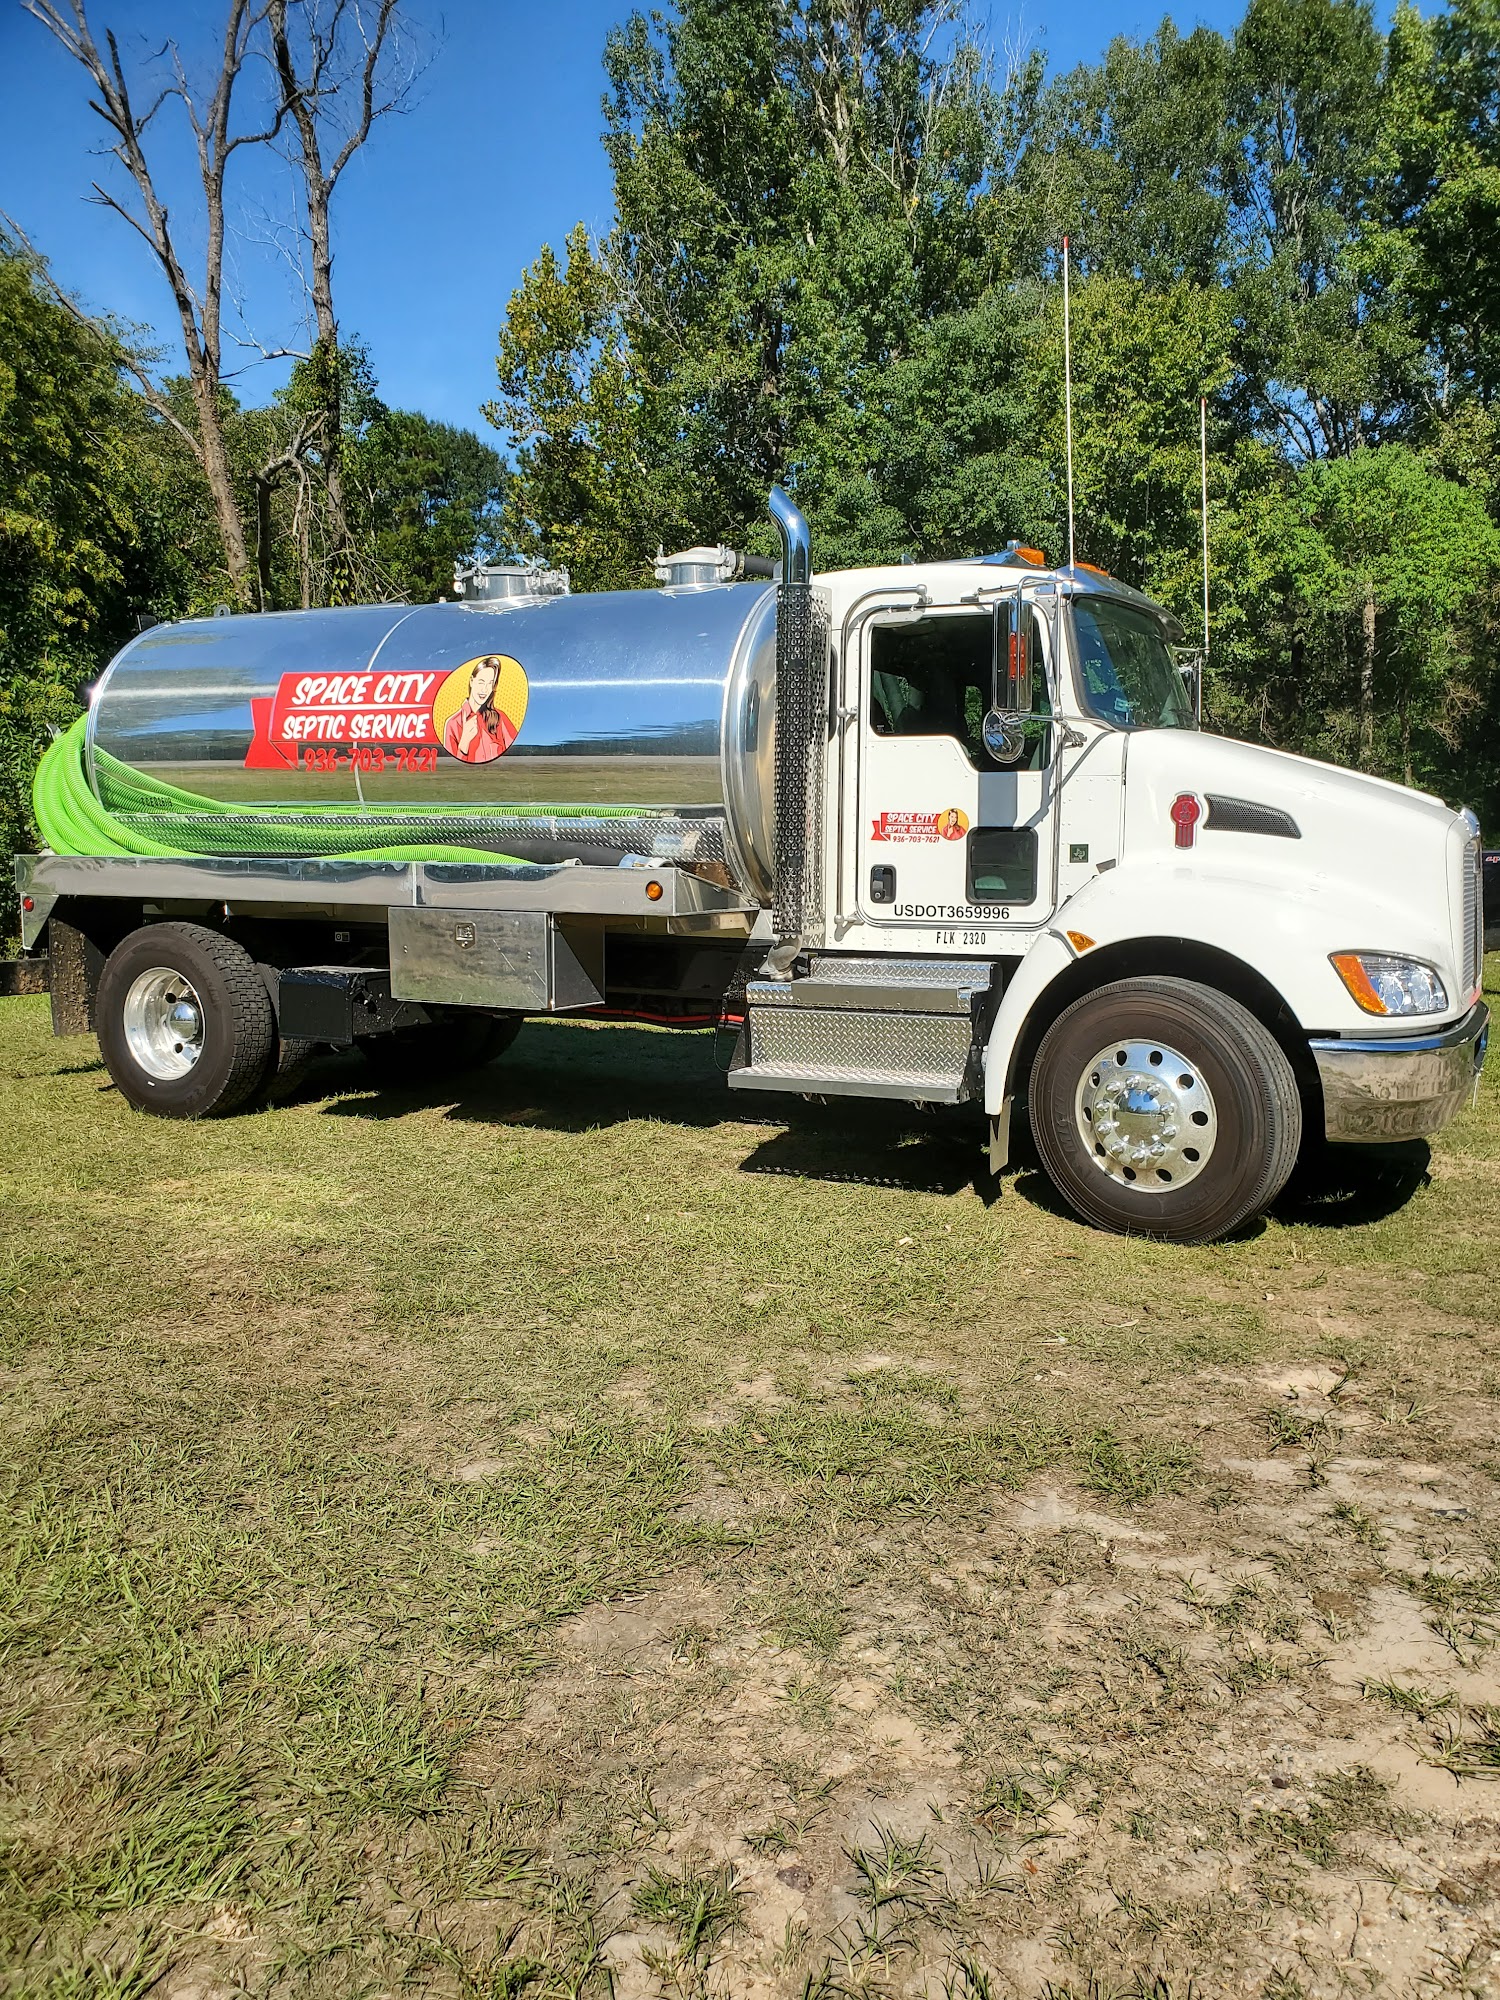 Space City Septic Service 484 US-69, Woodville Texas 75979